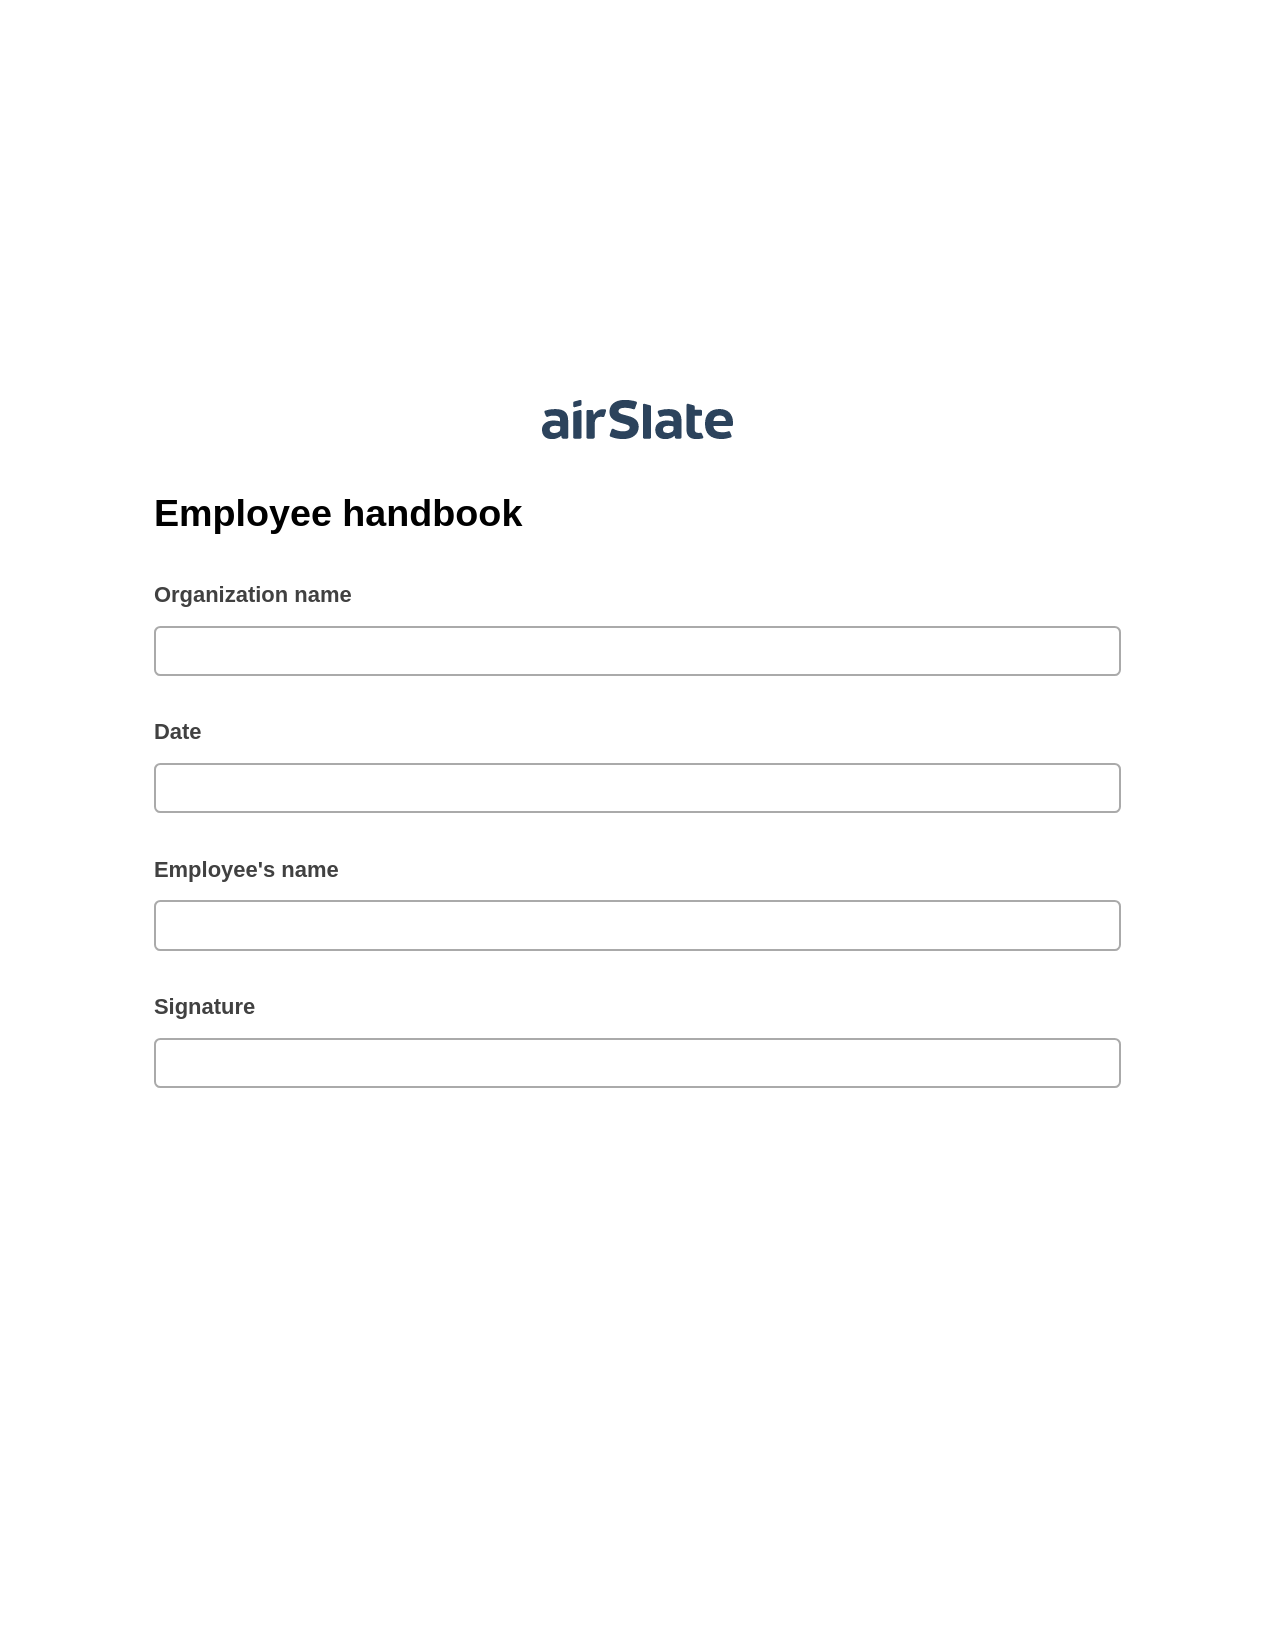 Multirole Employee handbook Pre-fill from Salesforce Record Bot, Send a Slate to MS Dynamics 365 Contact Bot, Export to Smartsheet